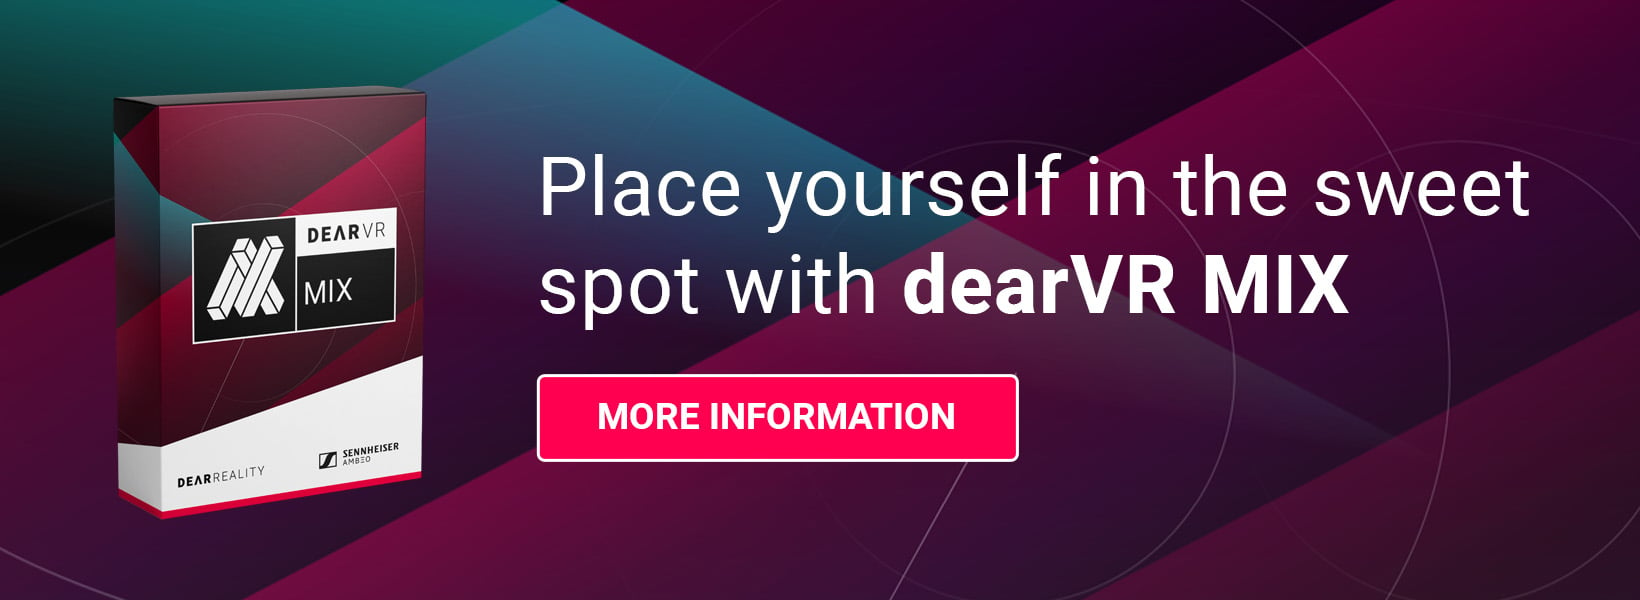 Place yourself in the sweet spot with dearVR MIX